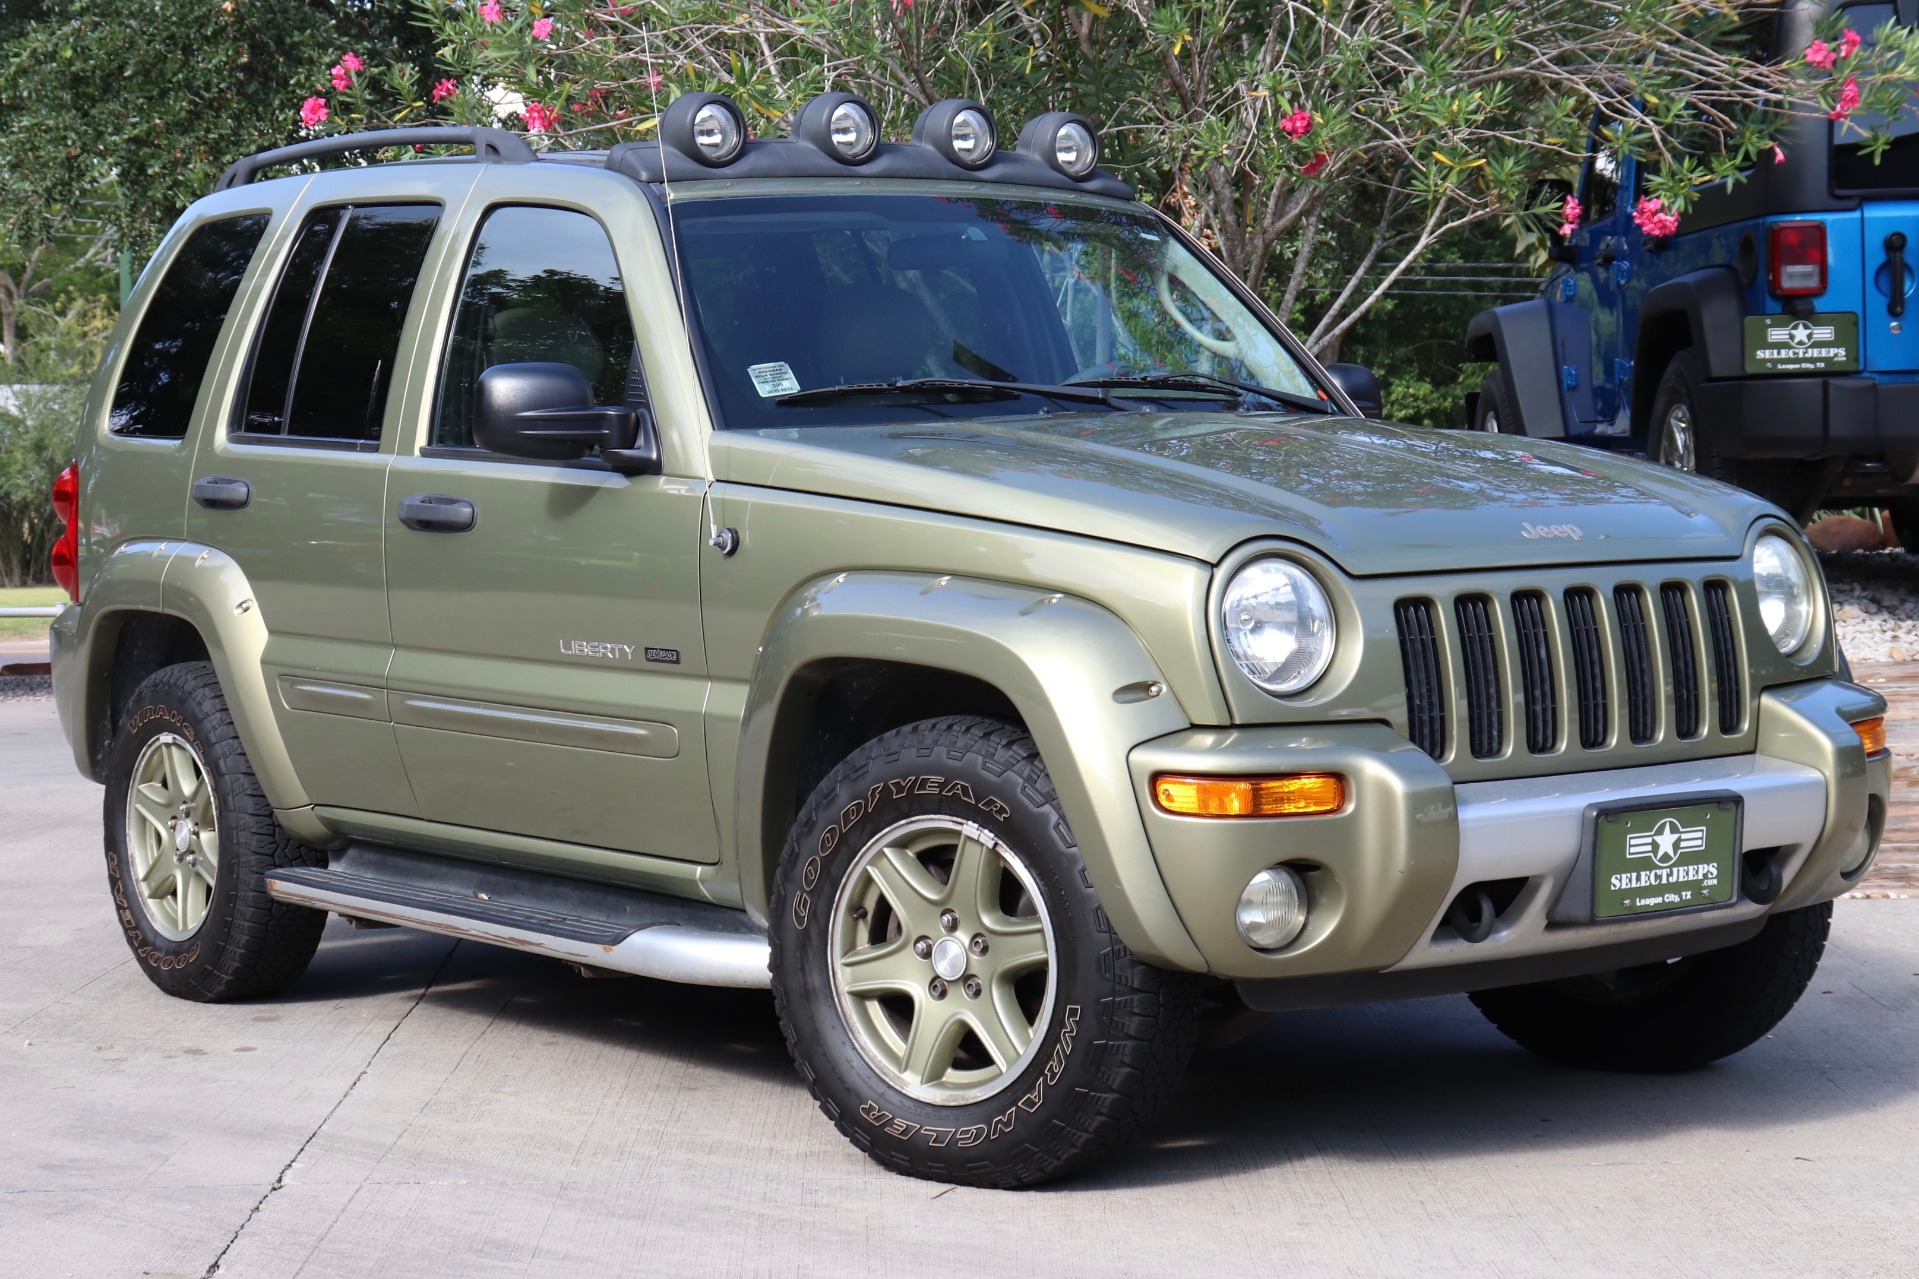 Used-2003-Jeep-Liberty-4dr-Renegade-4WD